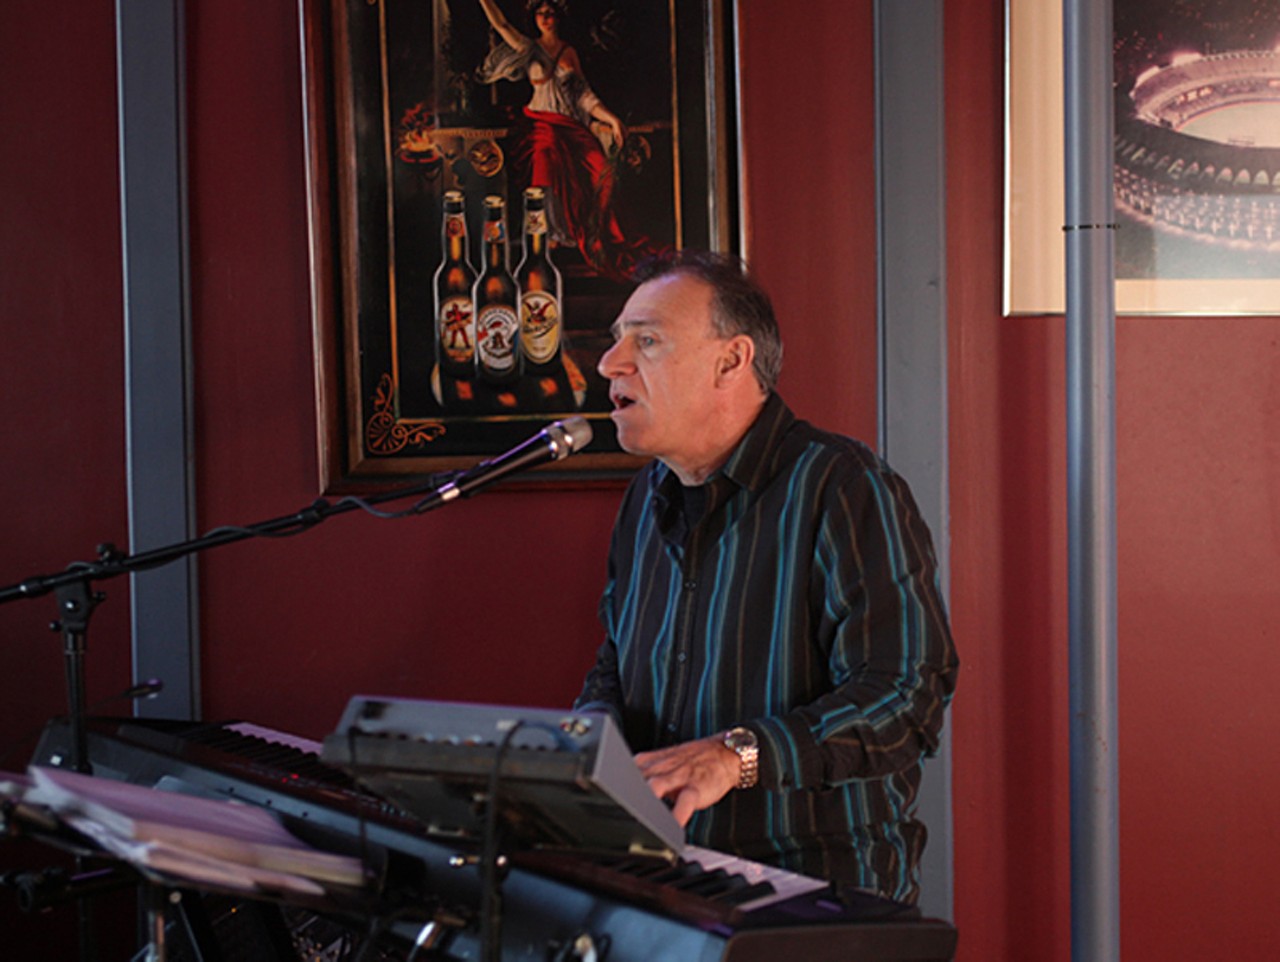 Schoemehl's frequently features music in the bar. This Sunday's musician was Rocky Mantia.